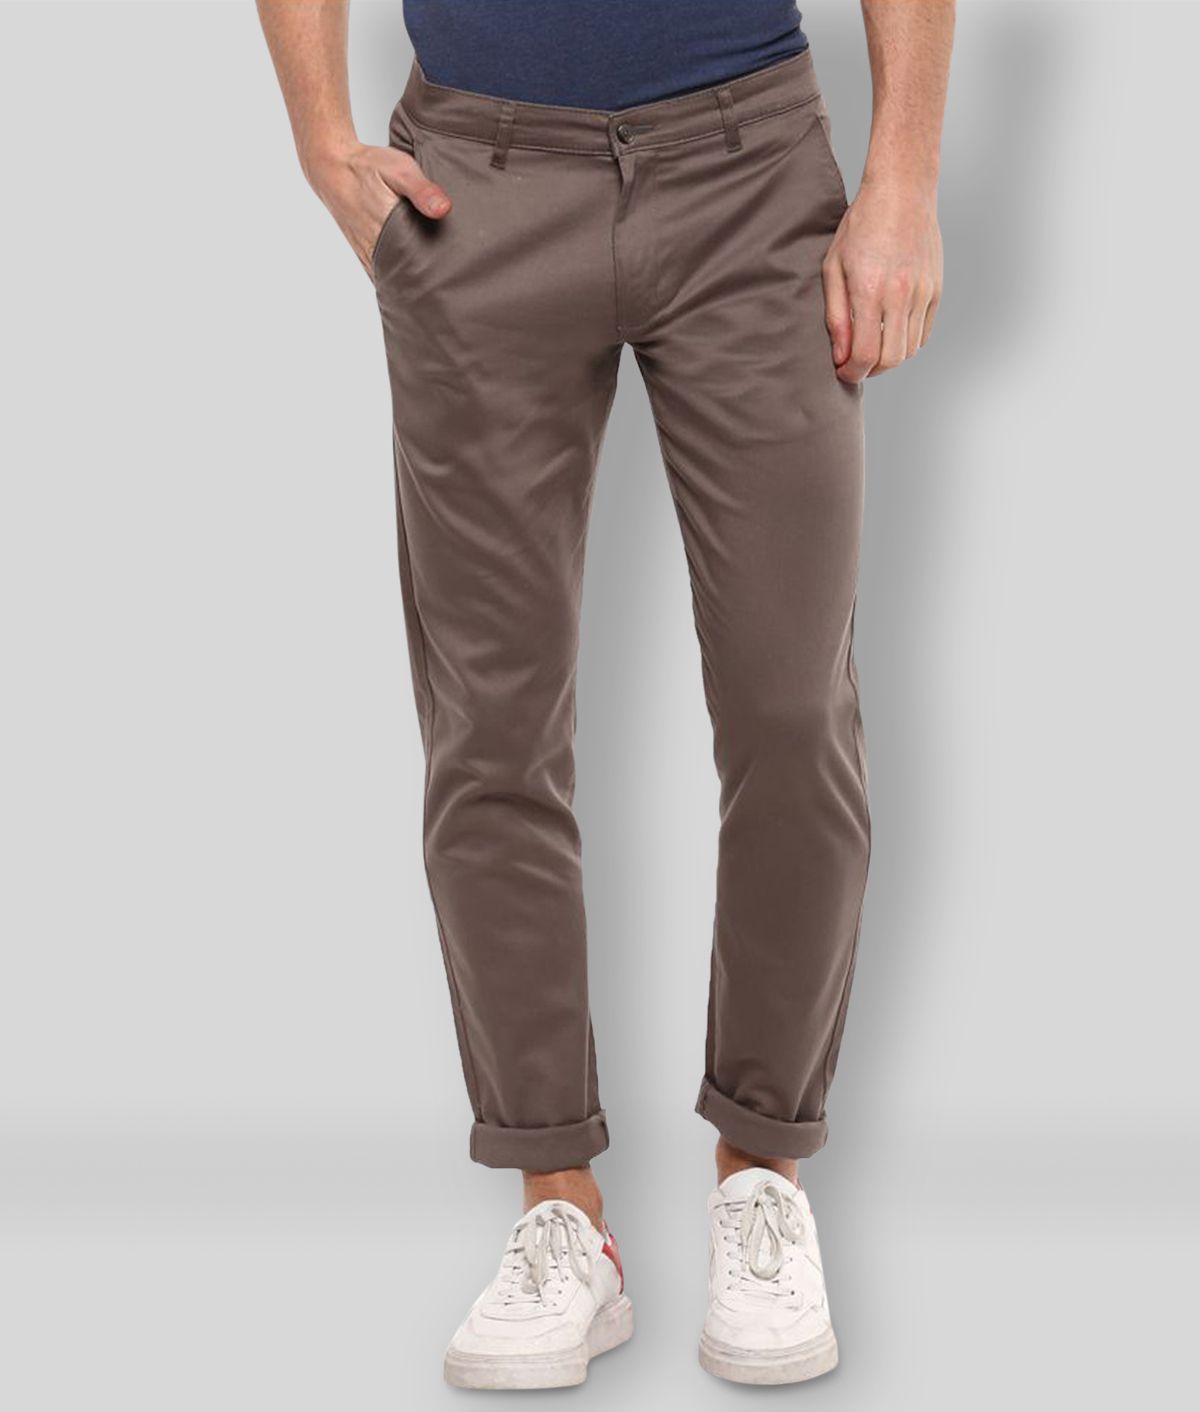     			Inspire - Grey Cotton Blend Slim Fit Men's Chinos (Pack of 1)